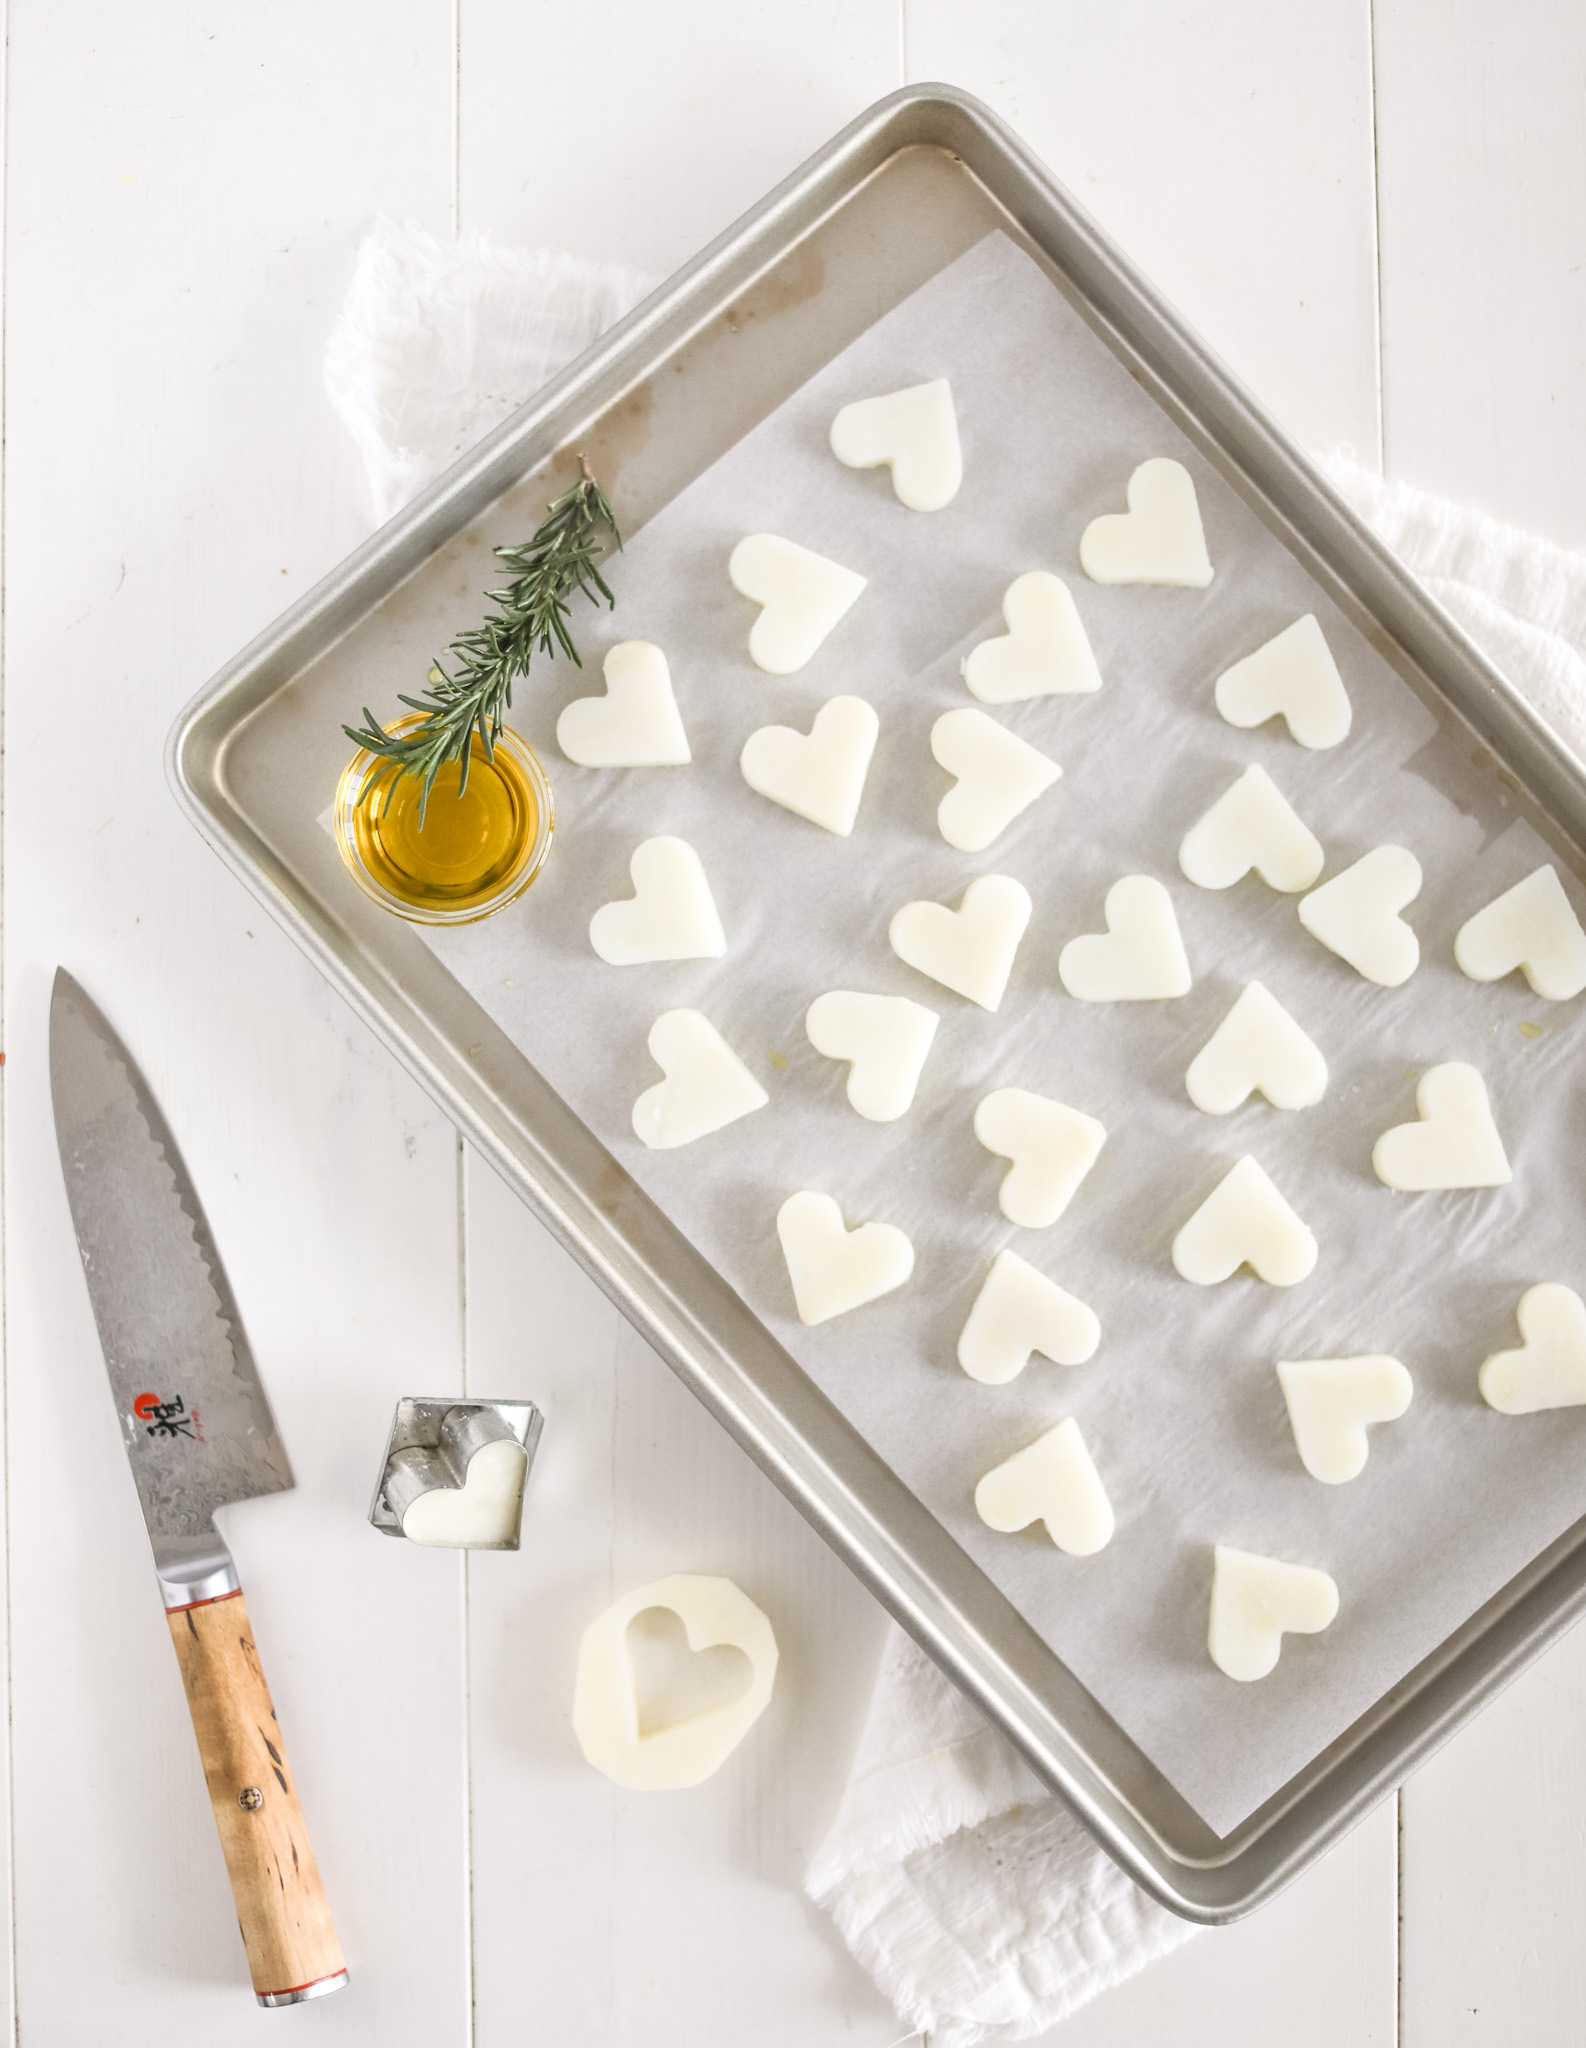 cutting potatoes into heart shapes with rosemary and olive oil